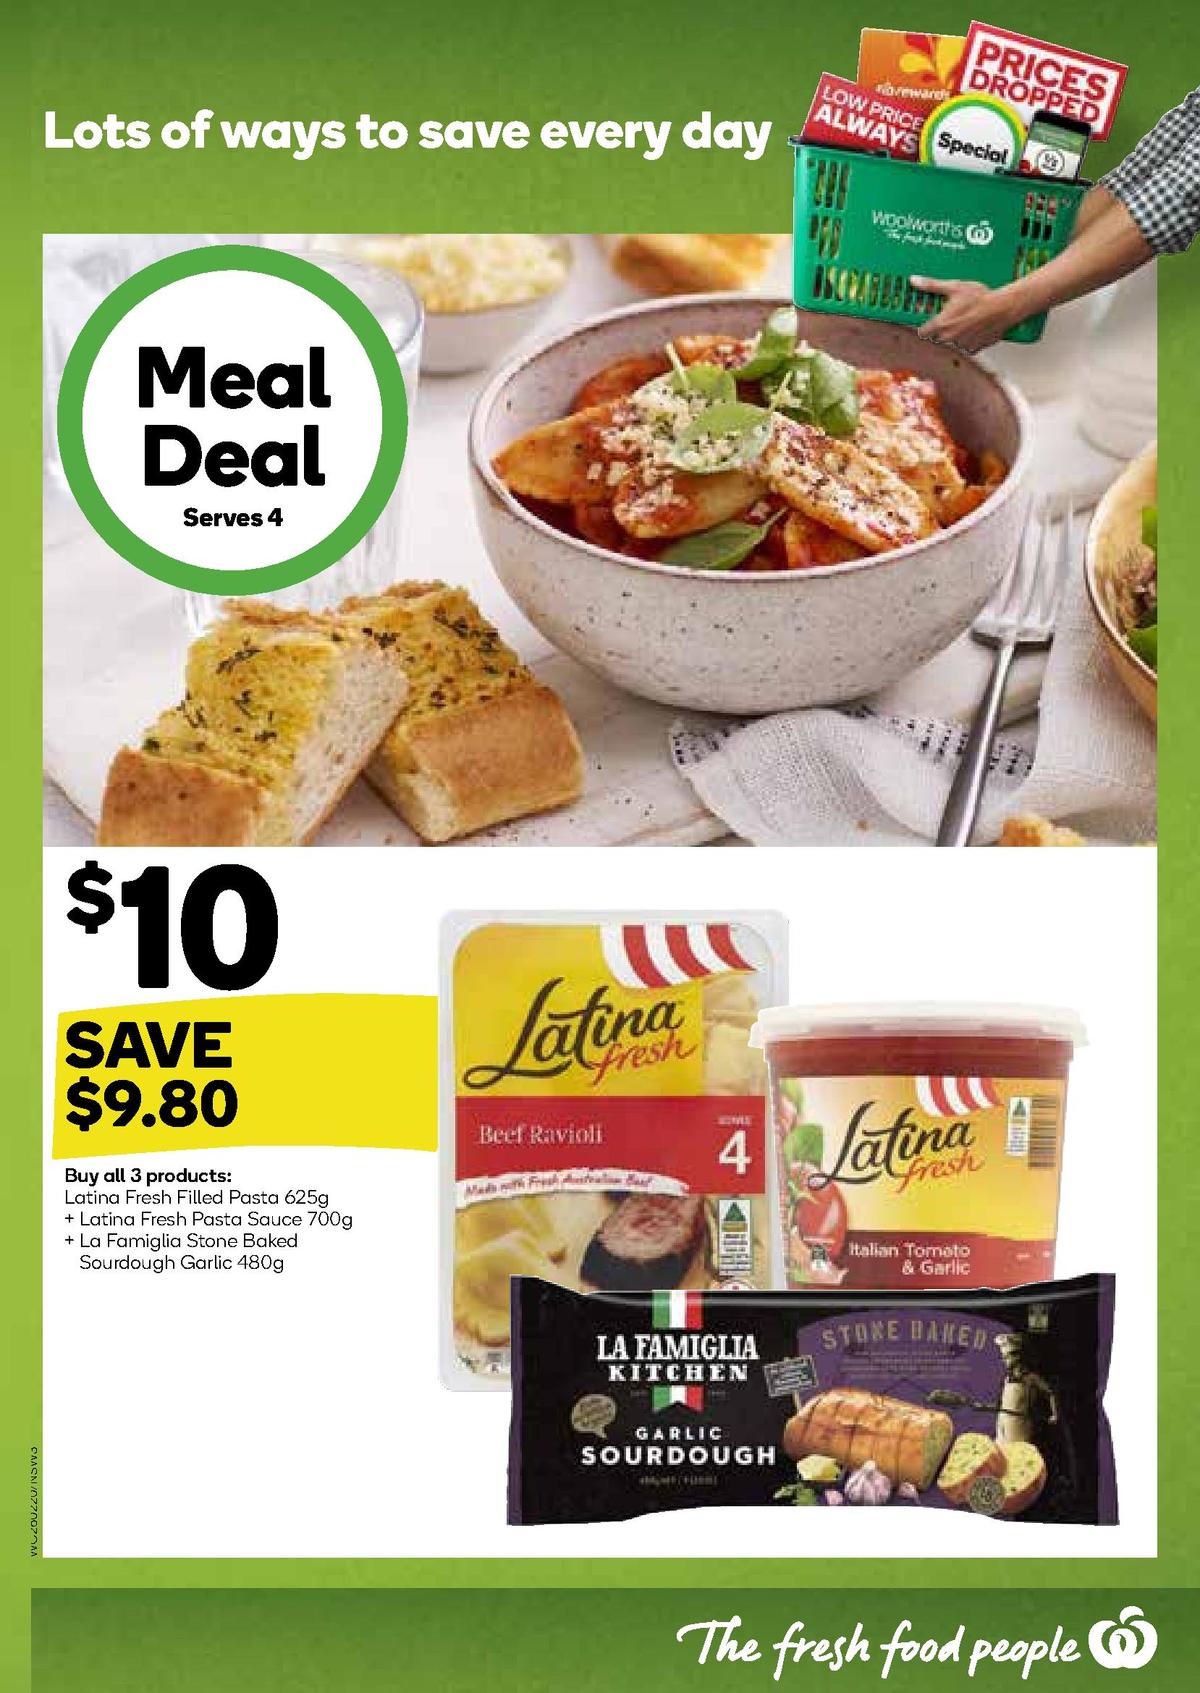 Woolworths Catalogues from 26 February